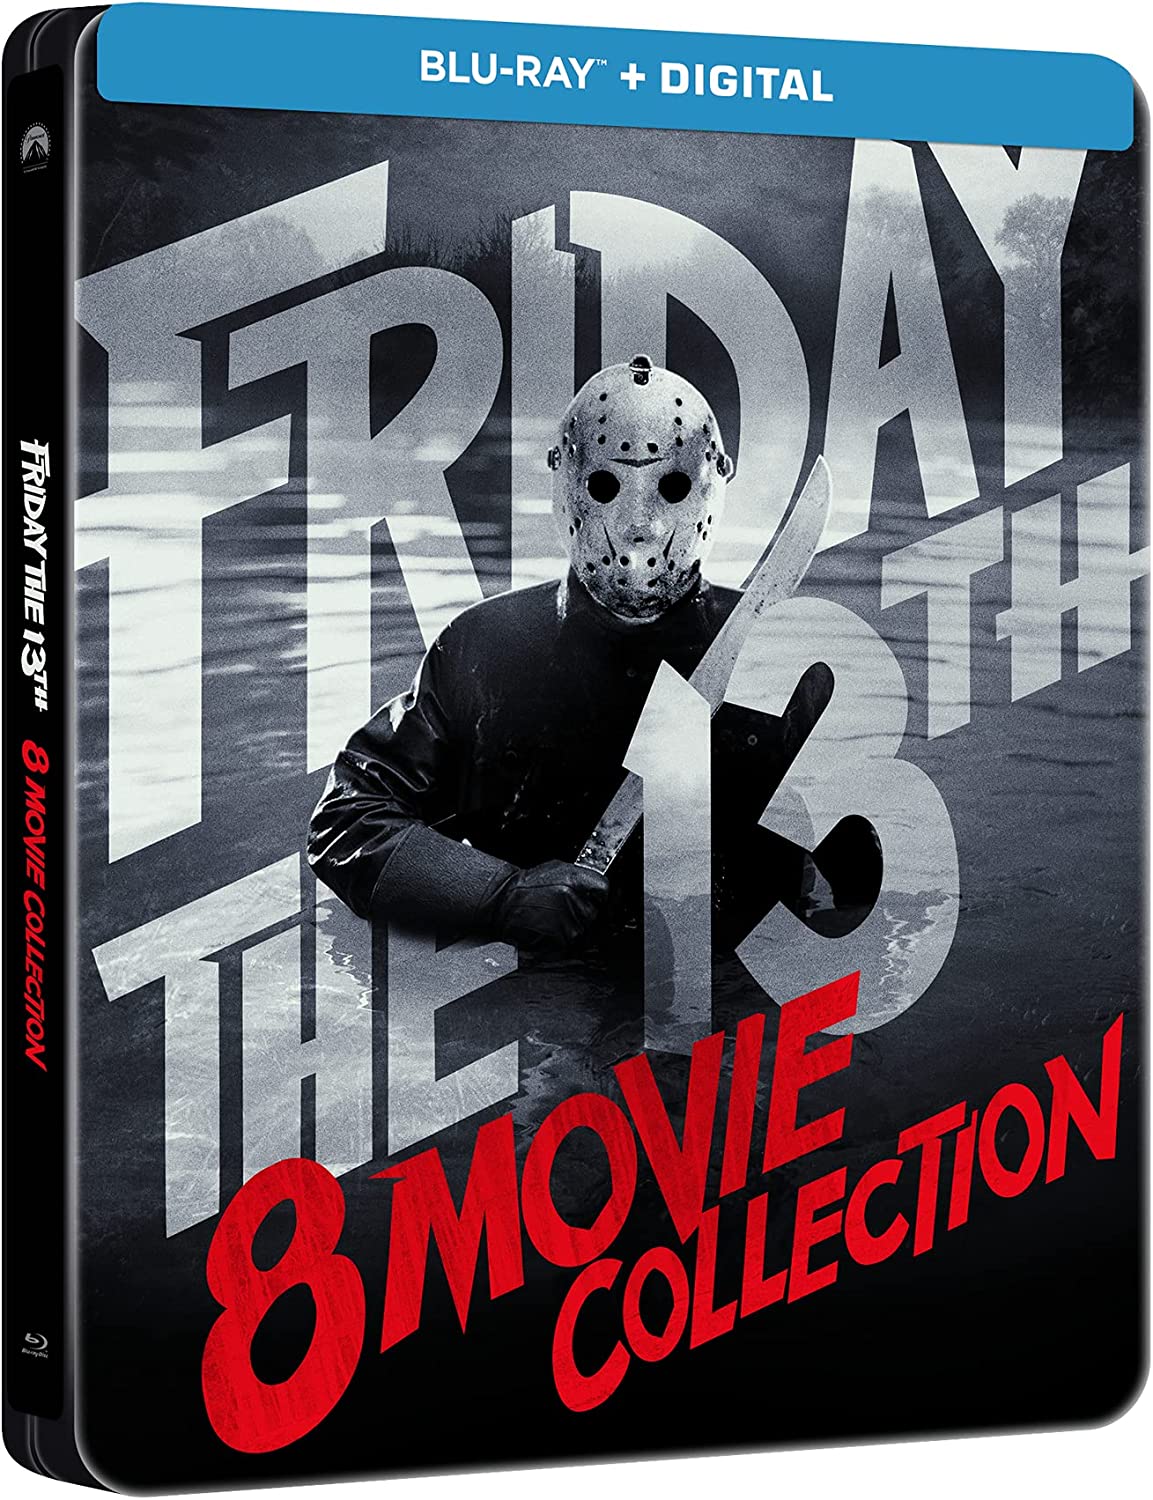 Friday The 13th 8 Movie Collection SB Front.jpg